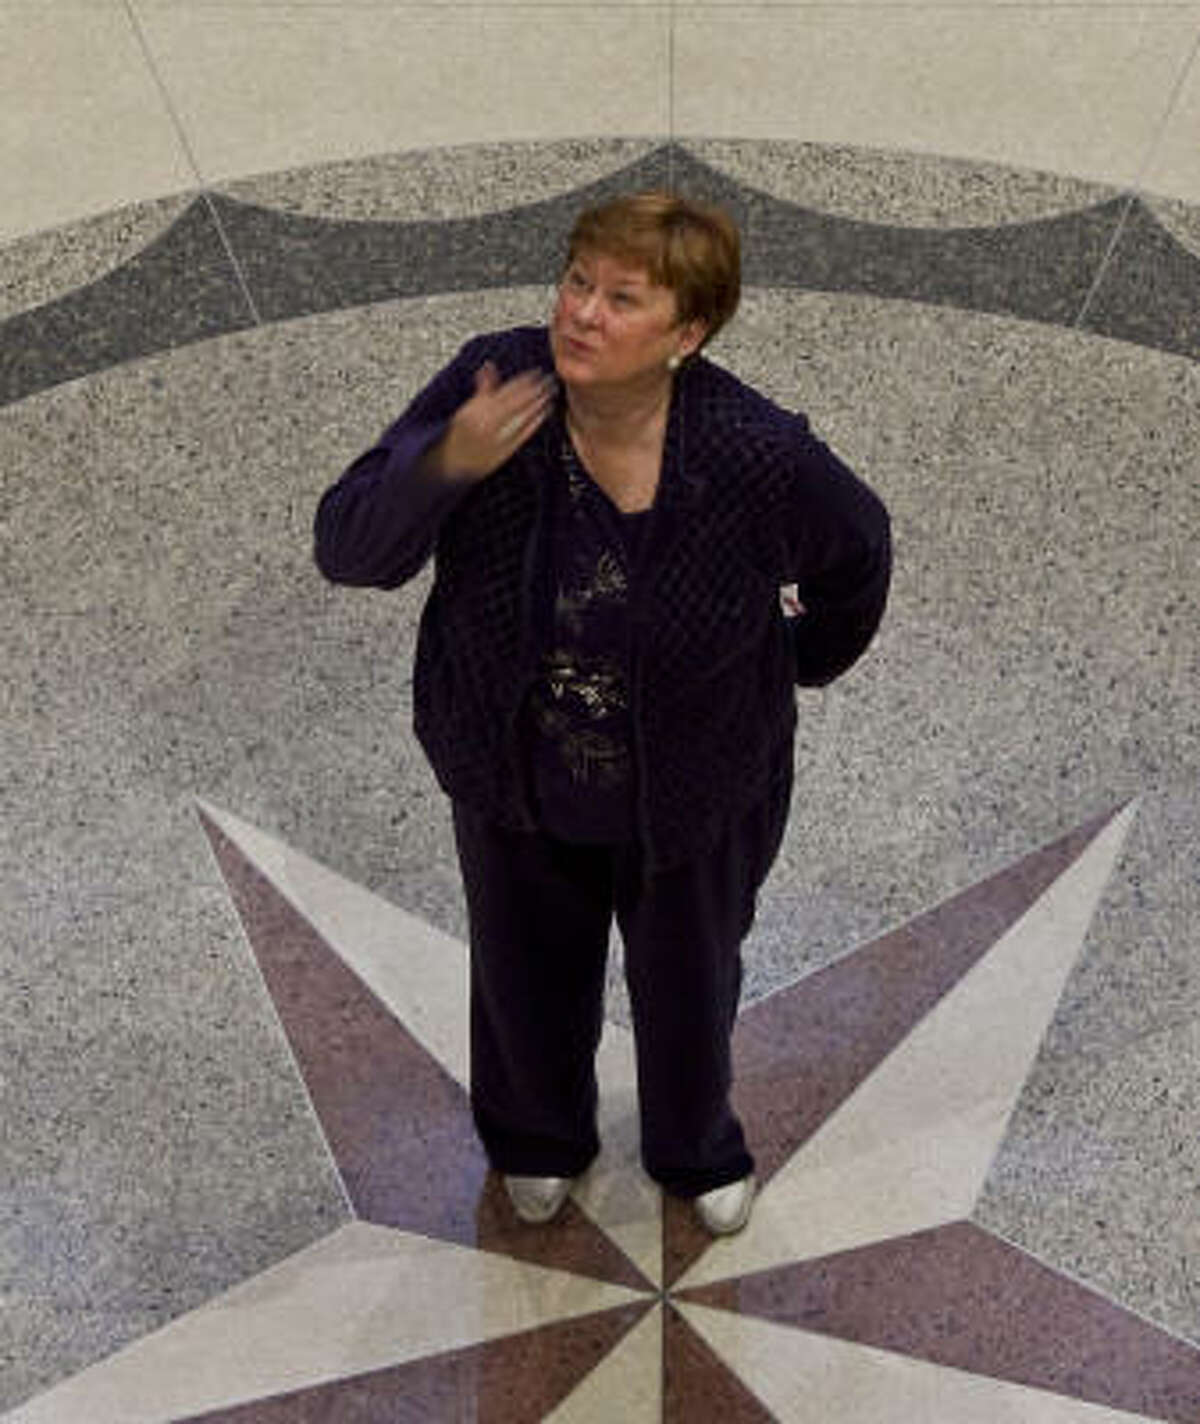 Beverly Kaufman blows a kiss to a friend Wednesday on her last day of work as Harris County Clerk. After nearly 17 years, she's set her sights elsewhere. "I don't want to go with my boots on," Kaufman said.